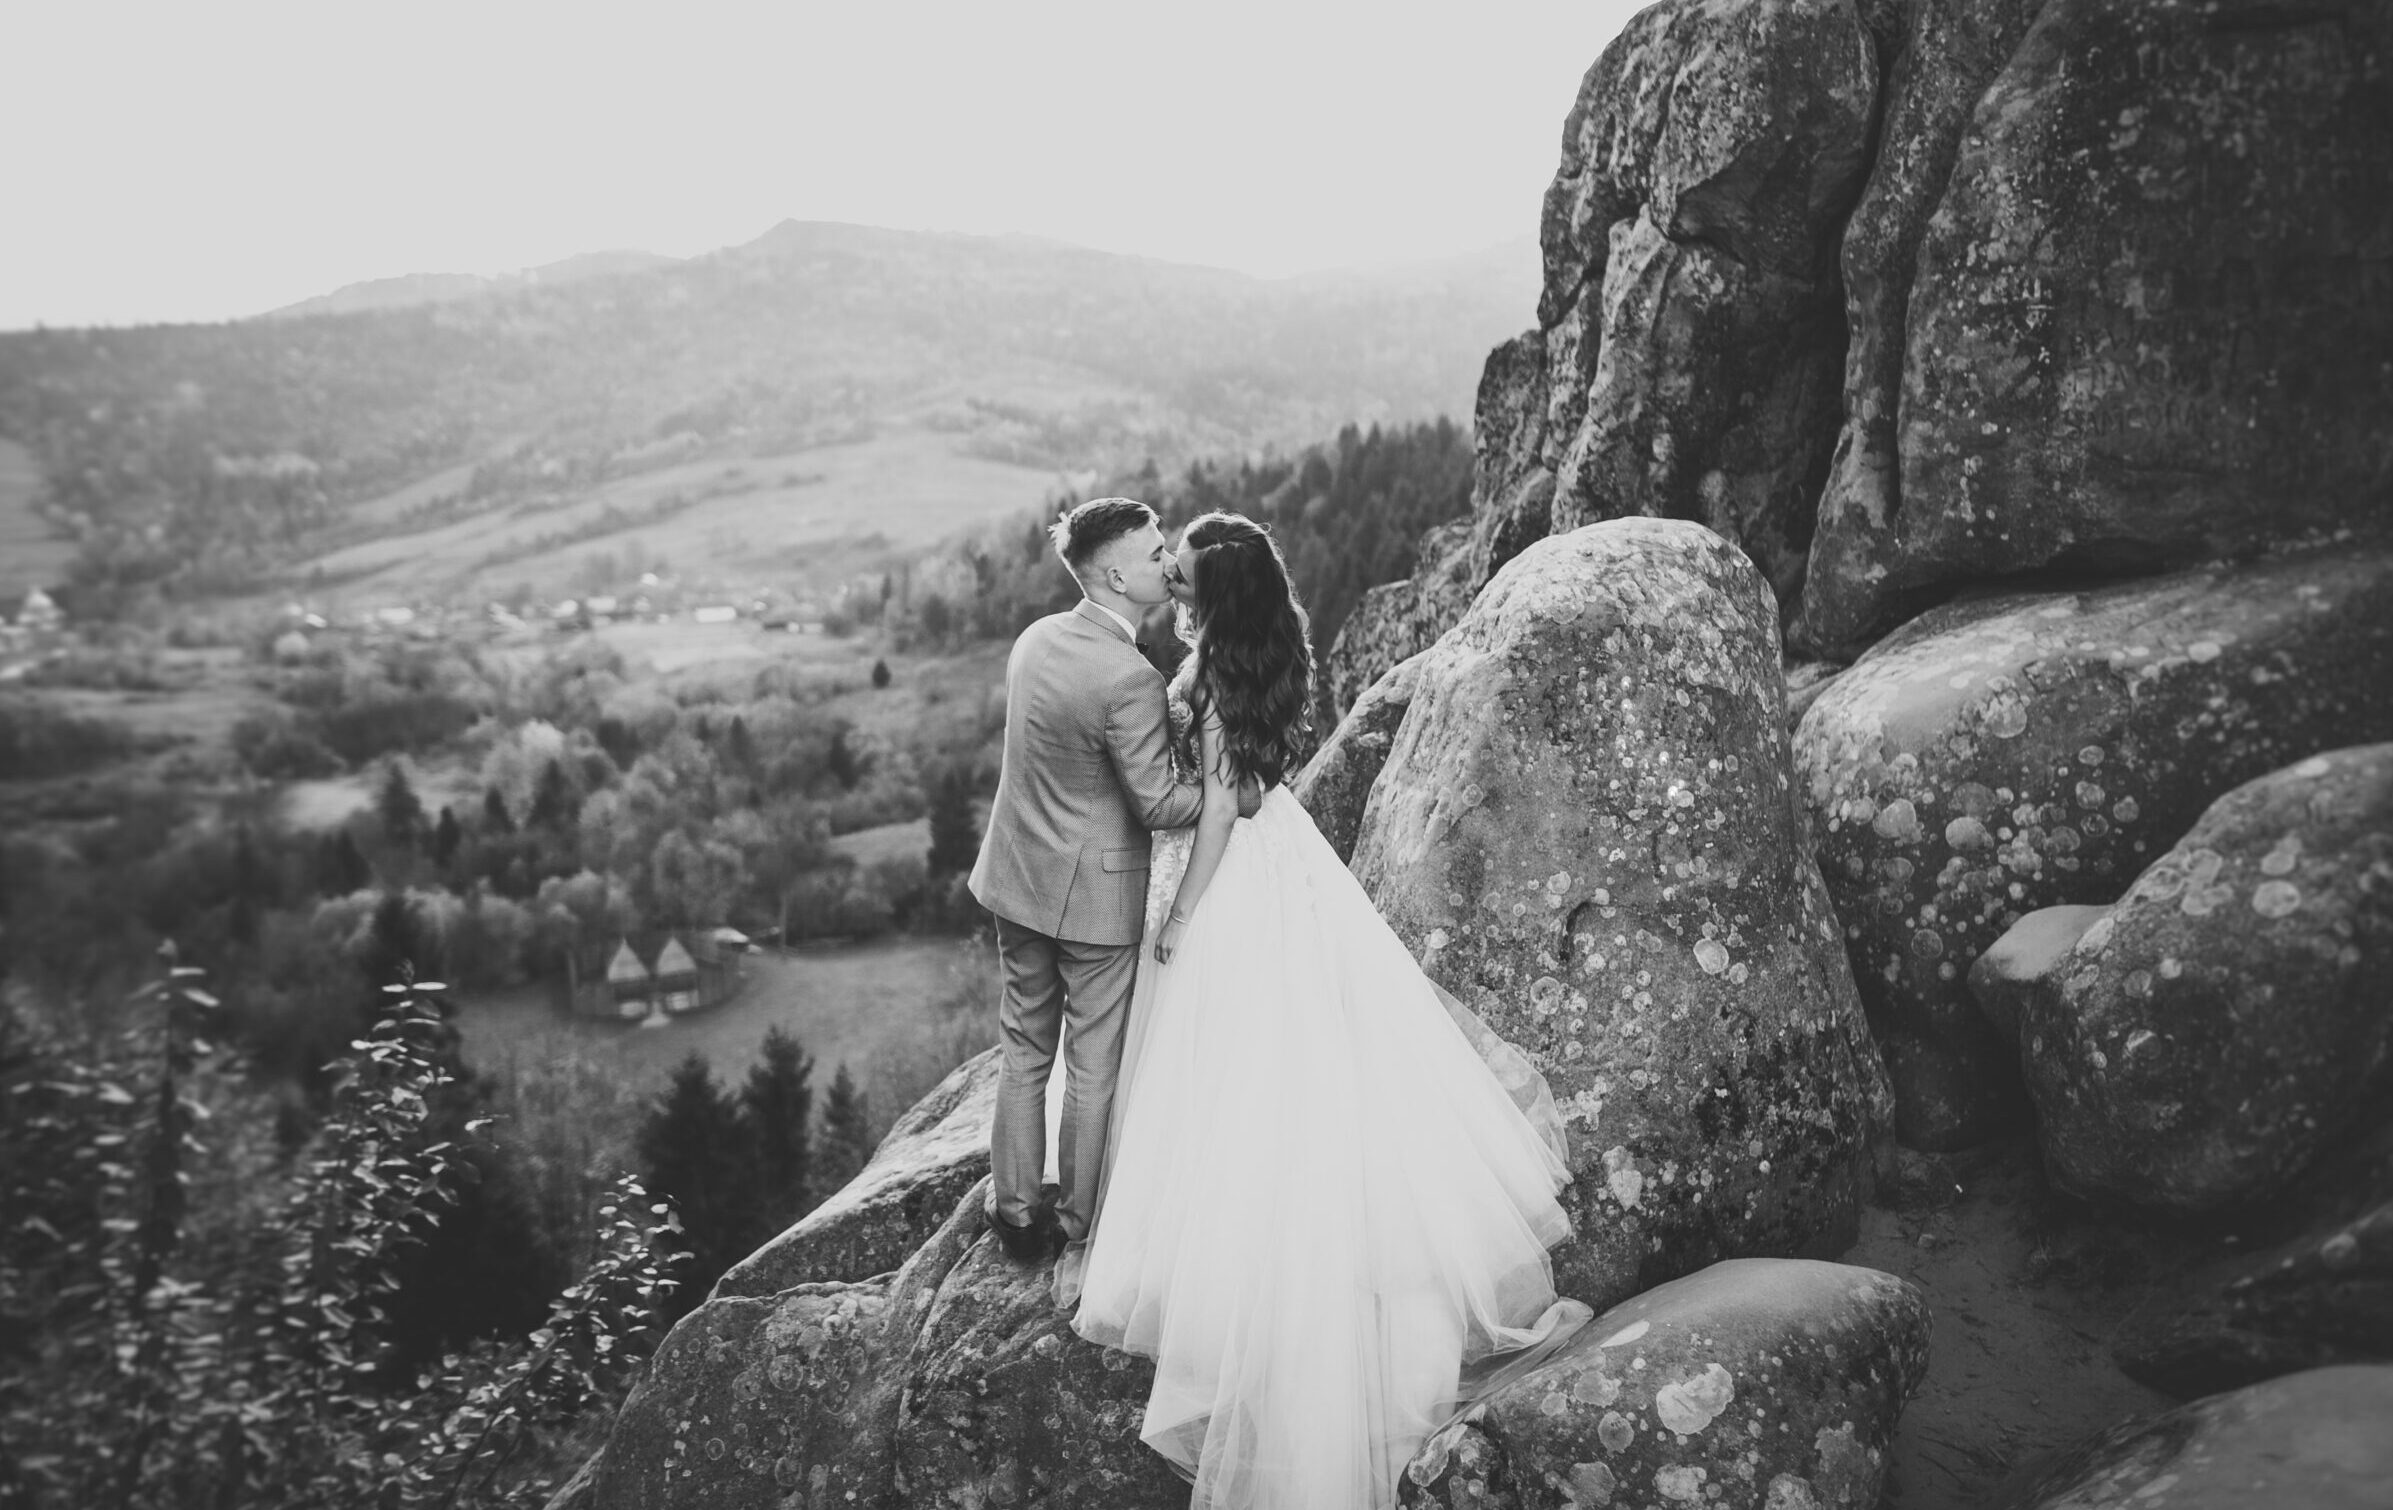 Loving,Husband,And,Woman,On,The,Background,Of,The,Mountains.